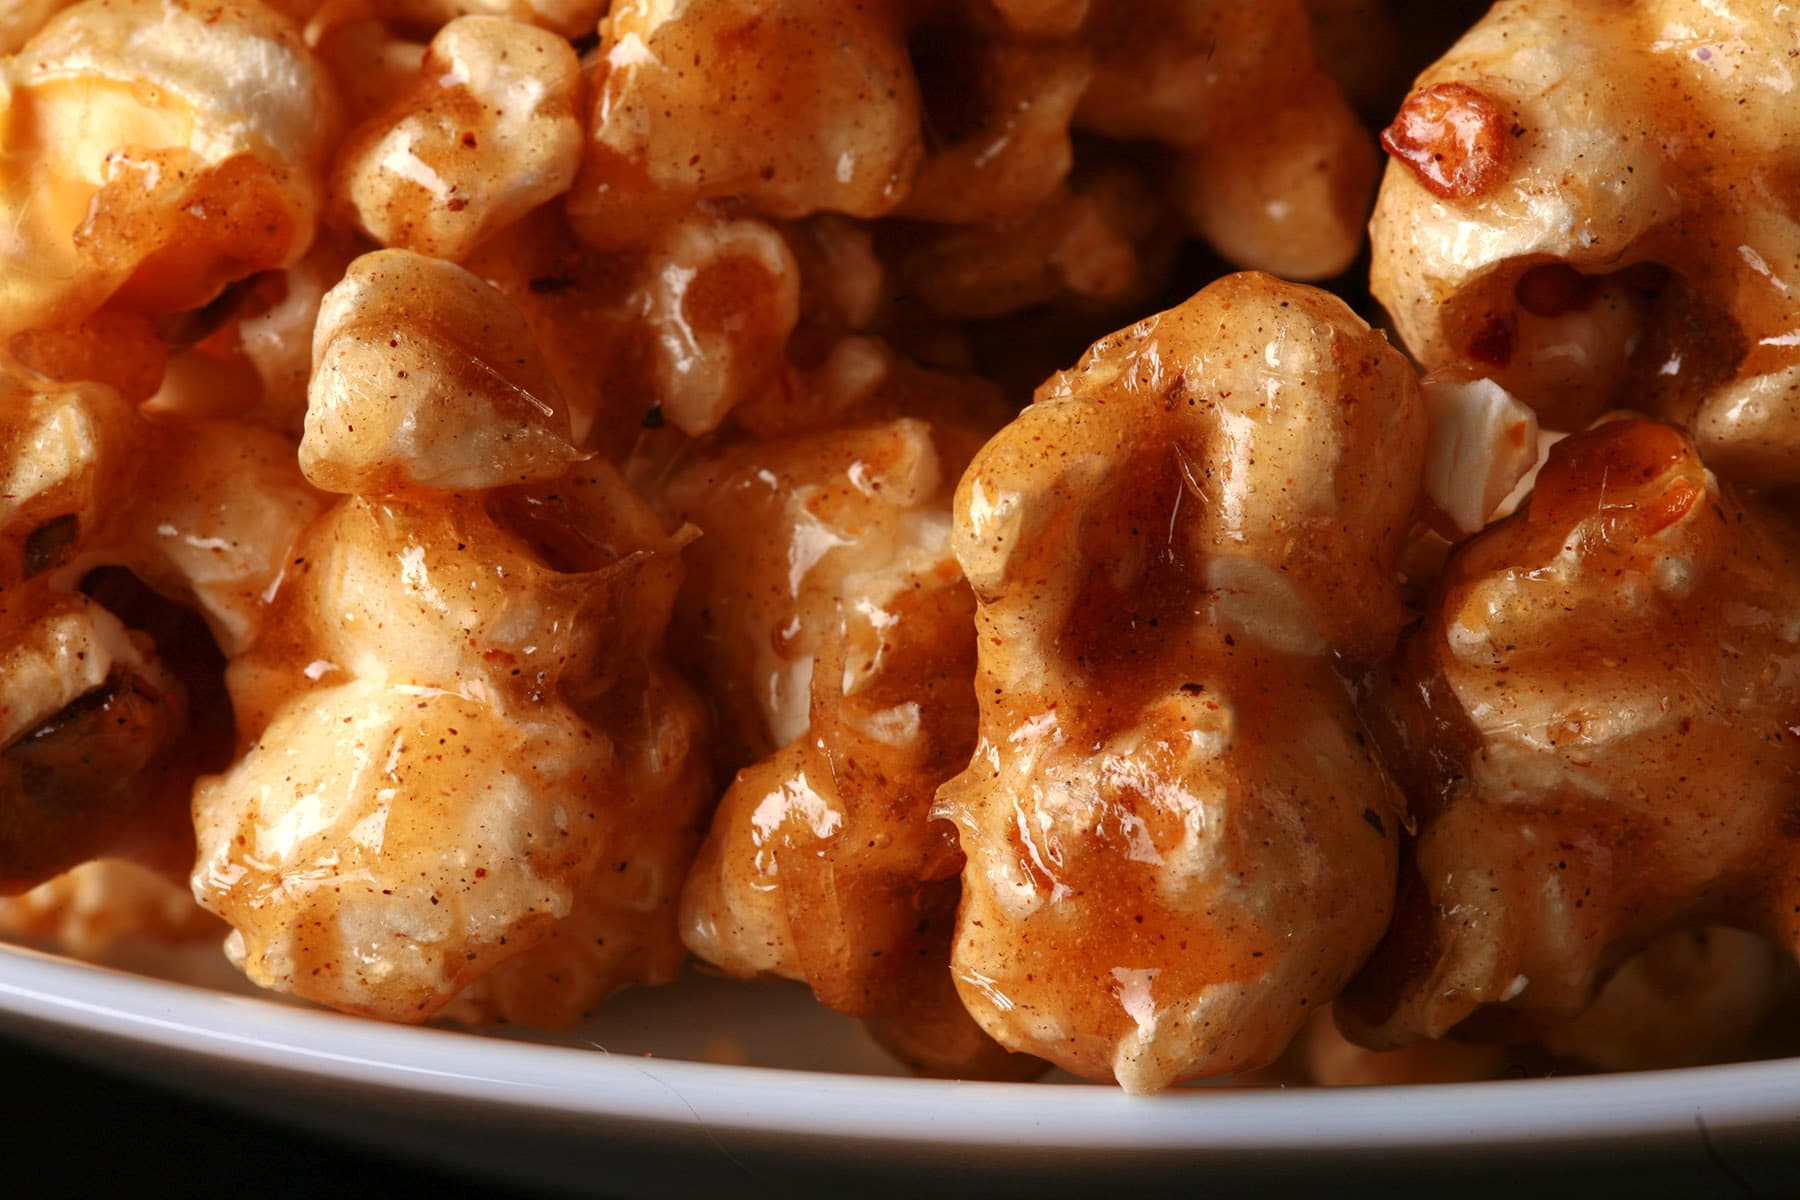 Close up photo of a bowl of caramel popcorn. The caramel has spices visible throughout.